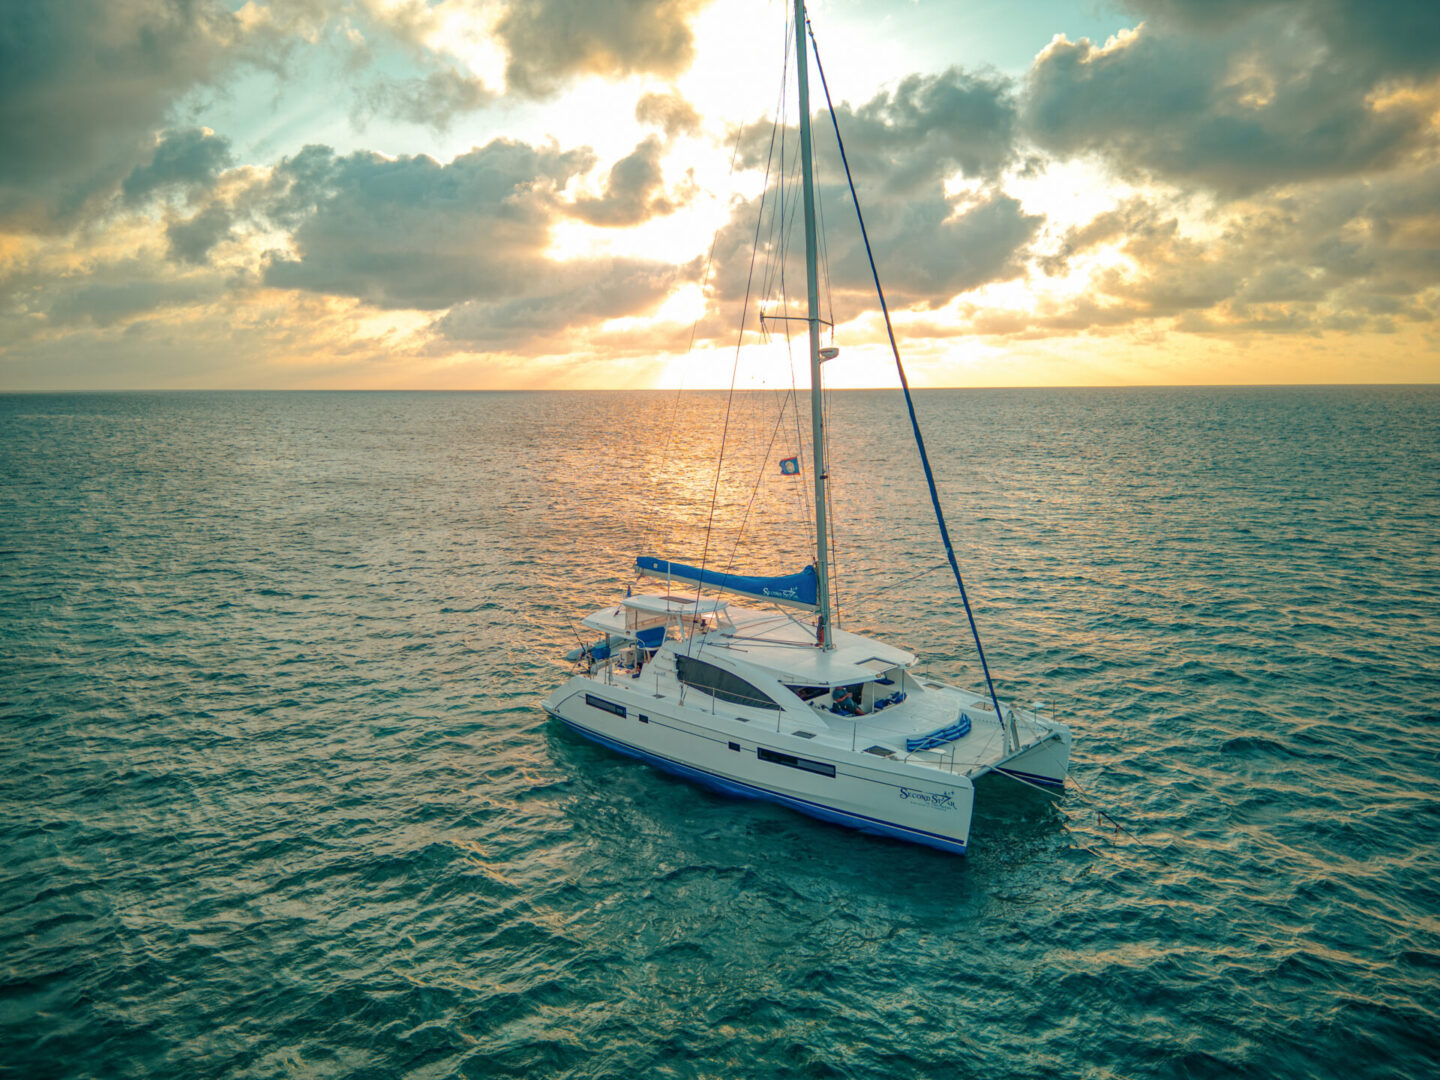 A catamaran sails in the ocean during a Belize Sailing Vacation at sunset.